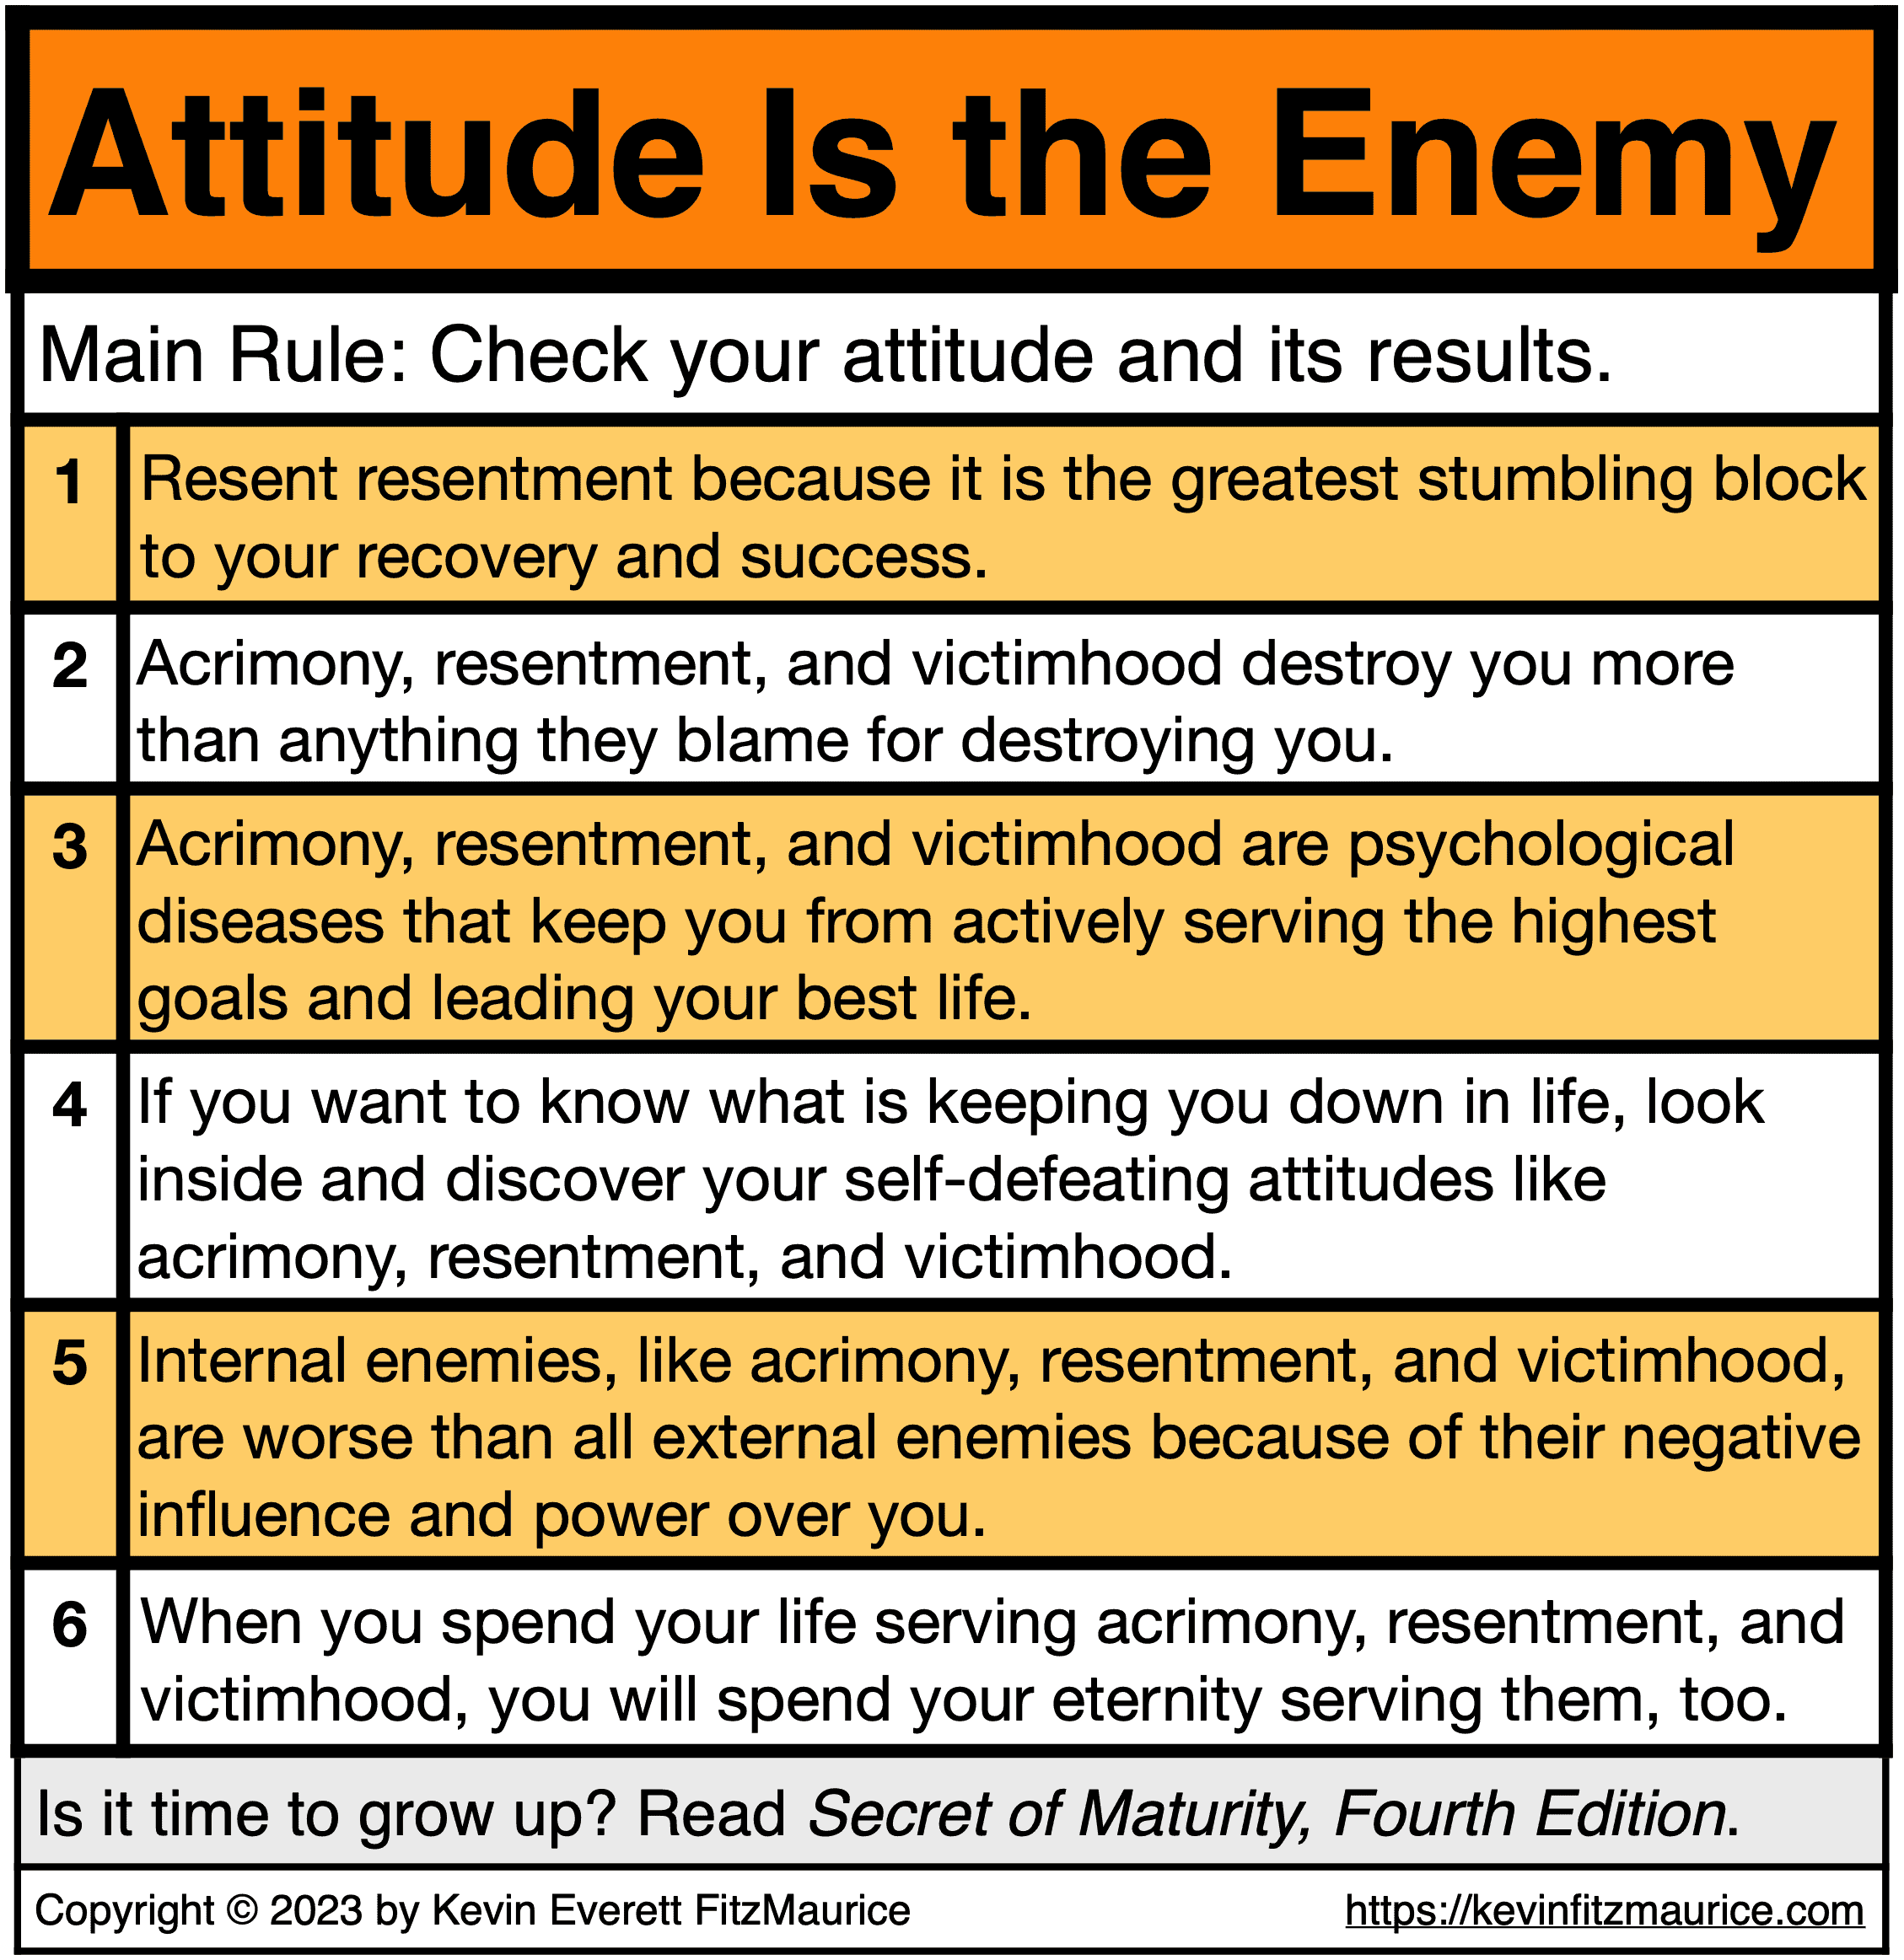 Attitude Is the Enemy or Friend of Your Life